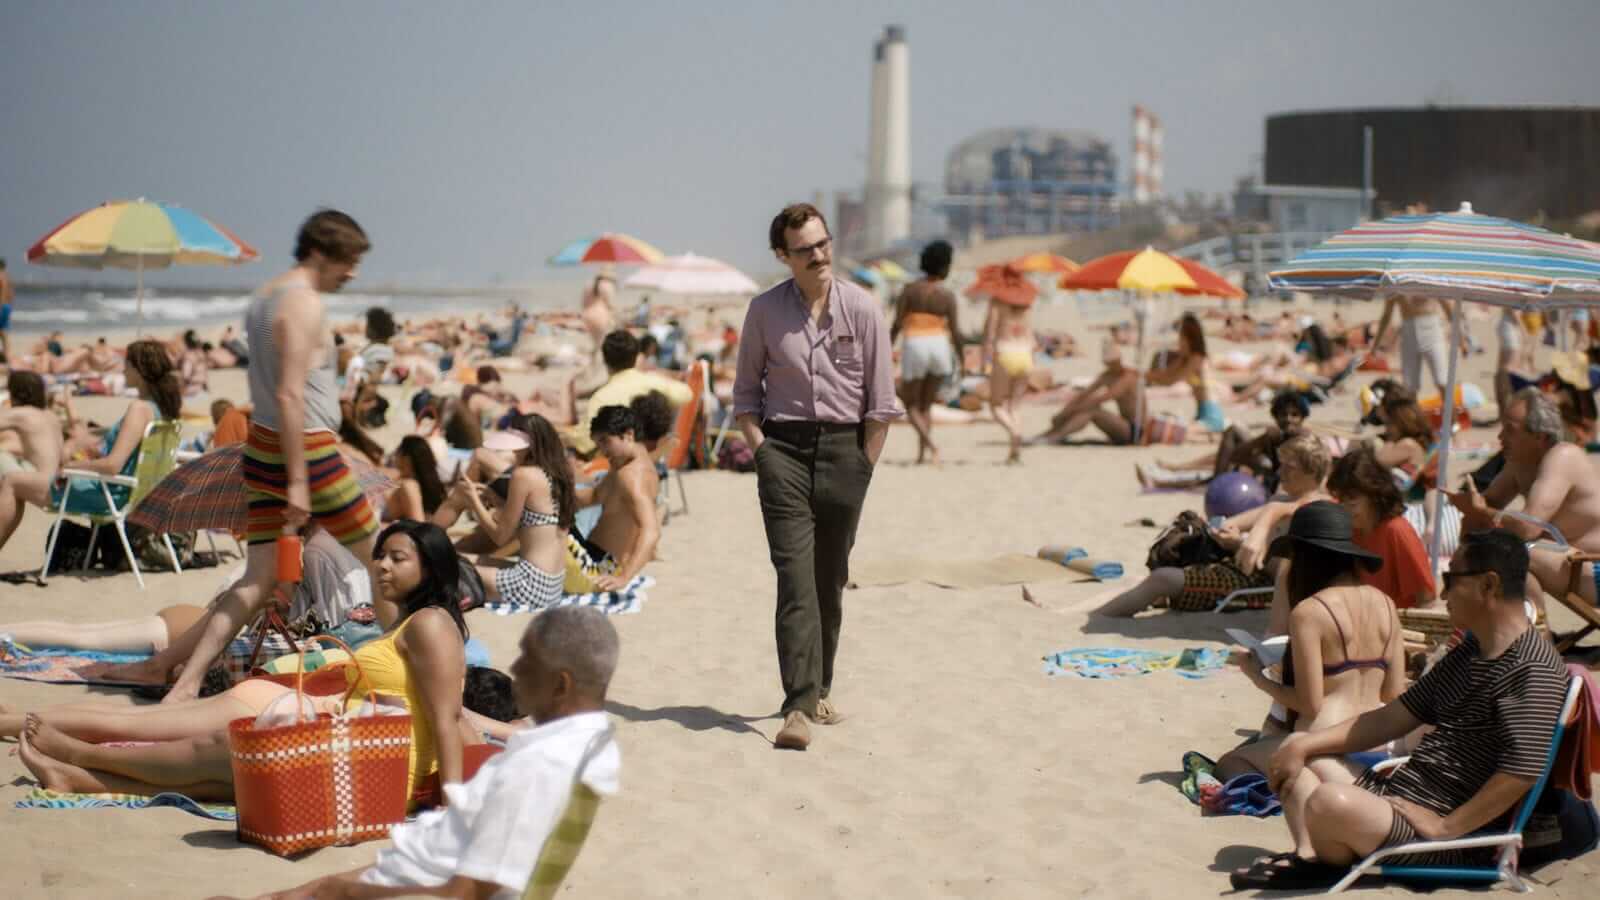 How Spike Jonze Shoots Movies About Loneliness - Wide Shot